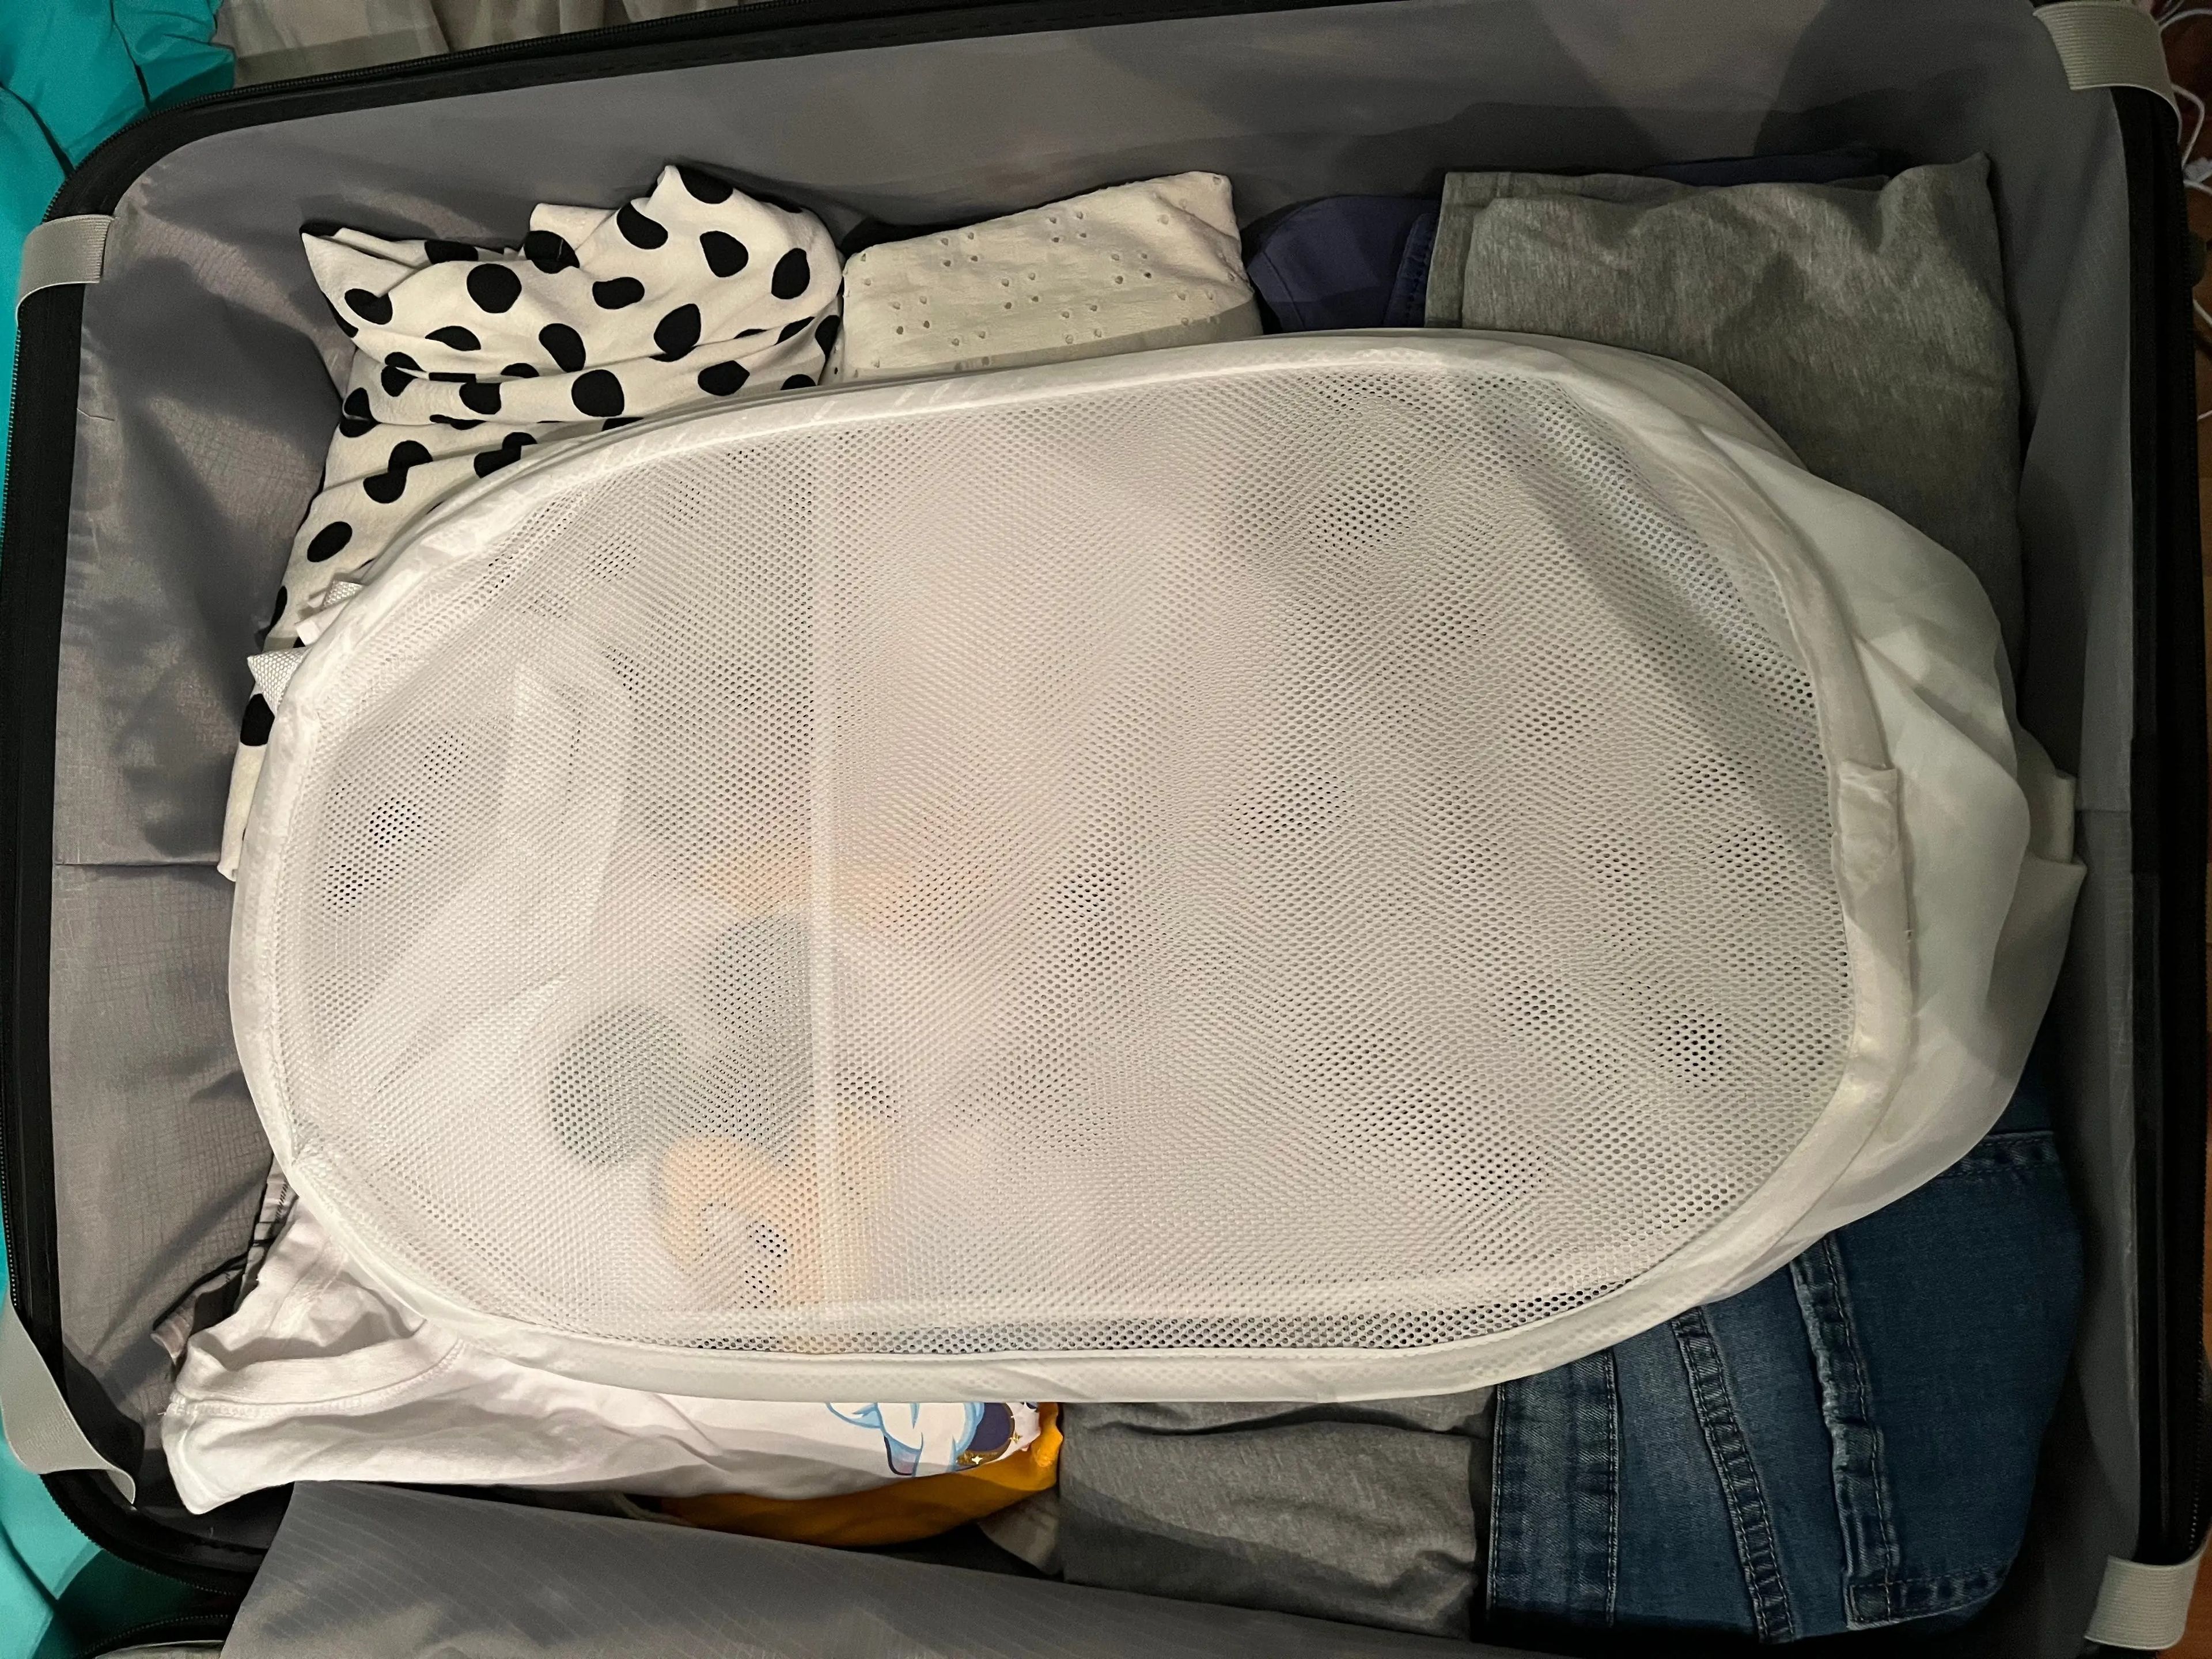 laundry hamper packed on top of a suitcase